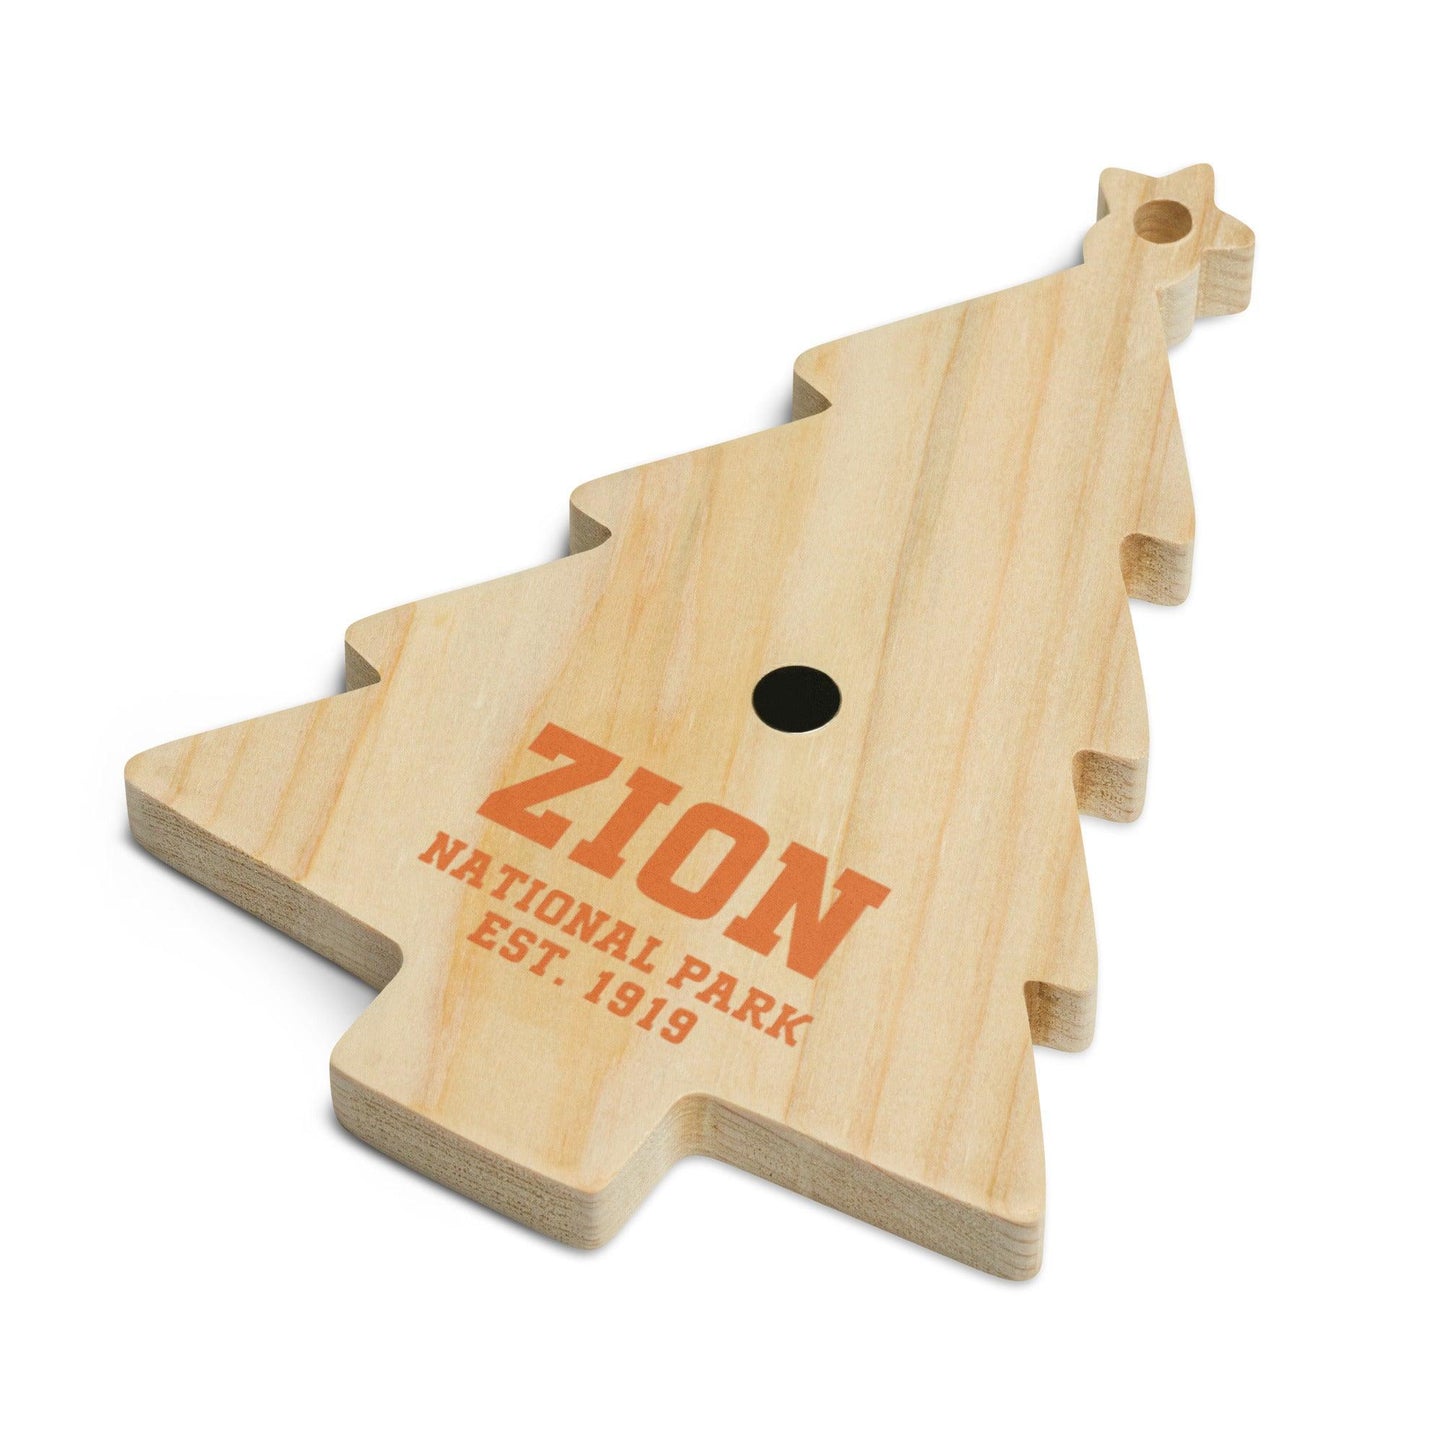 Zion National Park Wooden Ornament - Adventure Threads Company